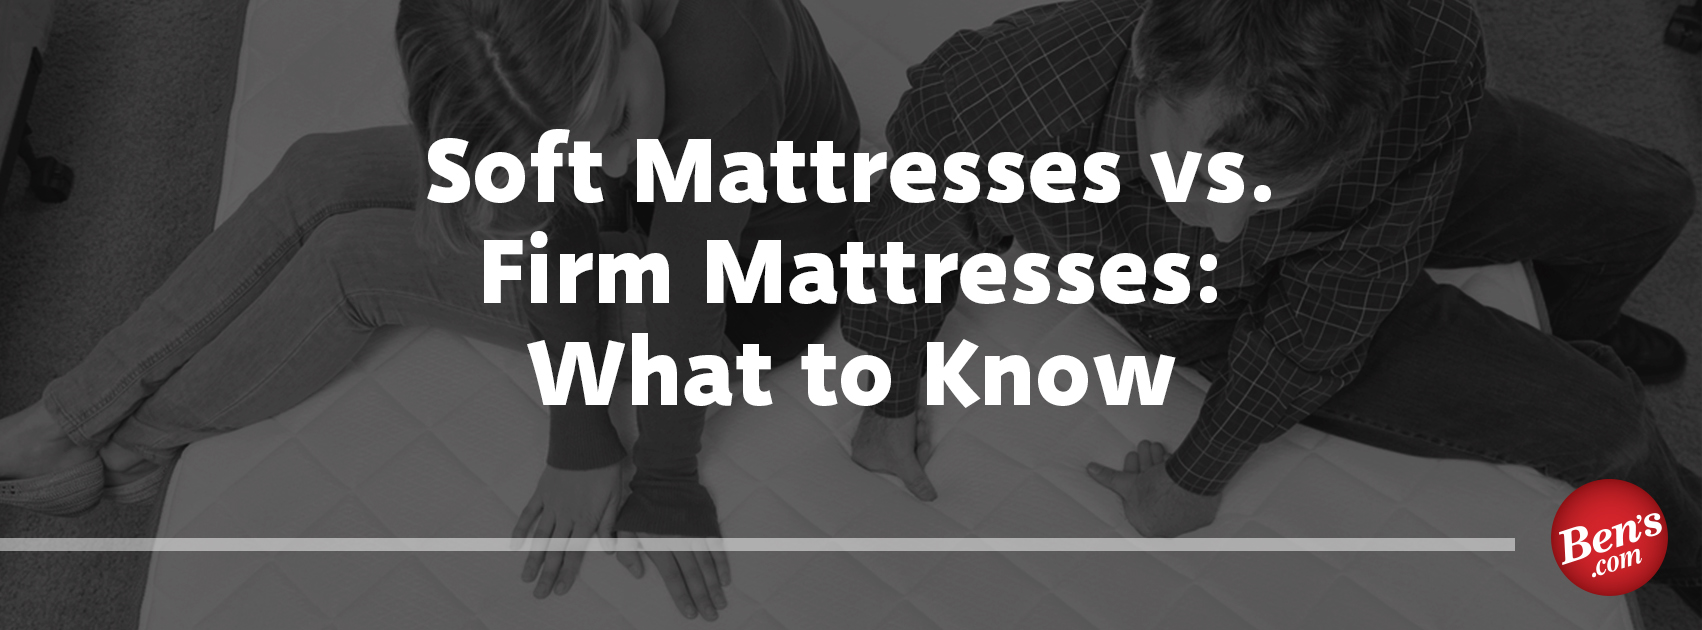 December (1) _ Soft Mattresses vs. Firm Mattresses - What to Know